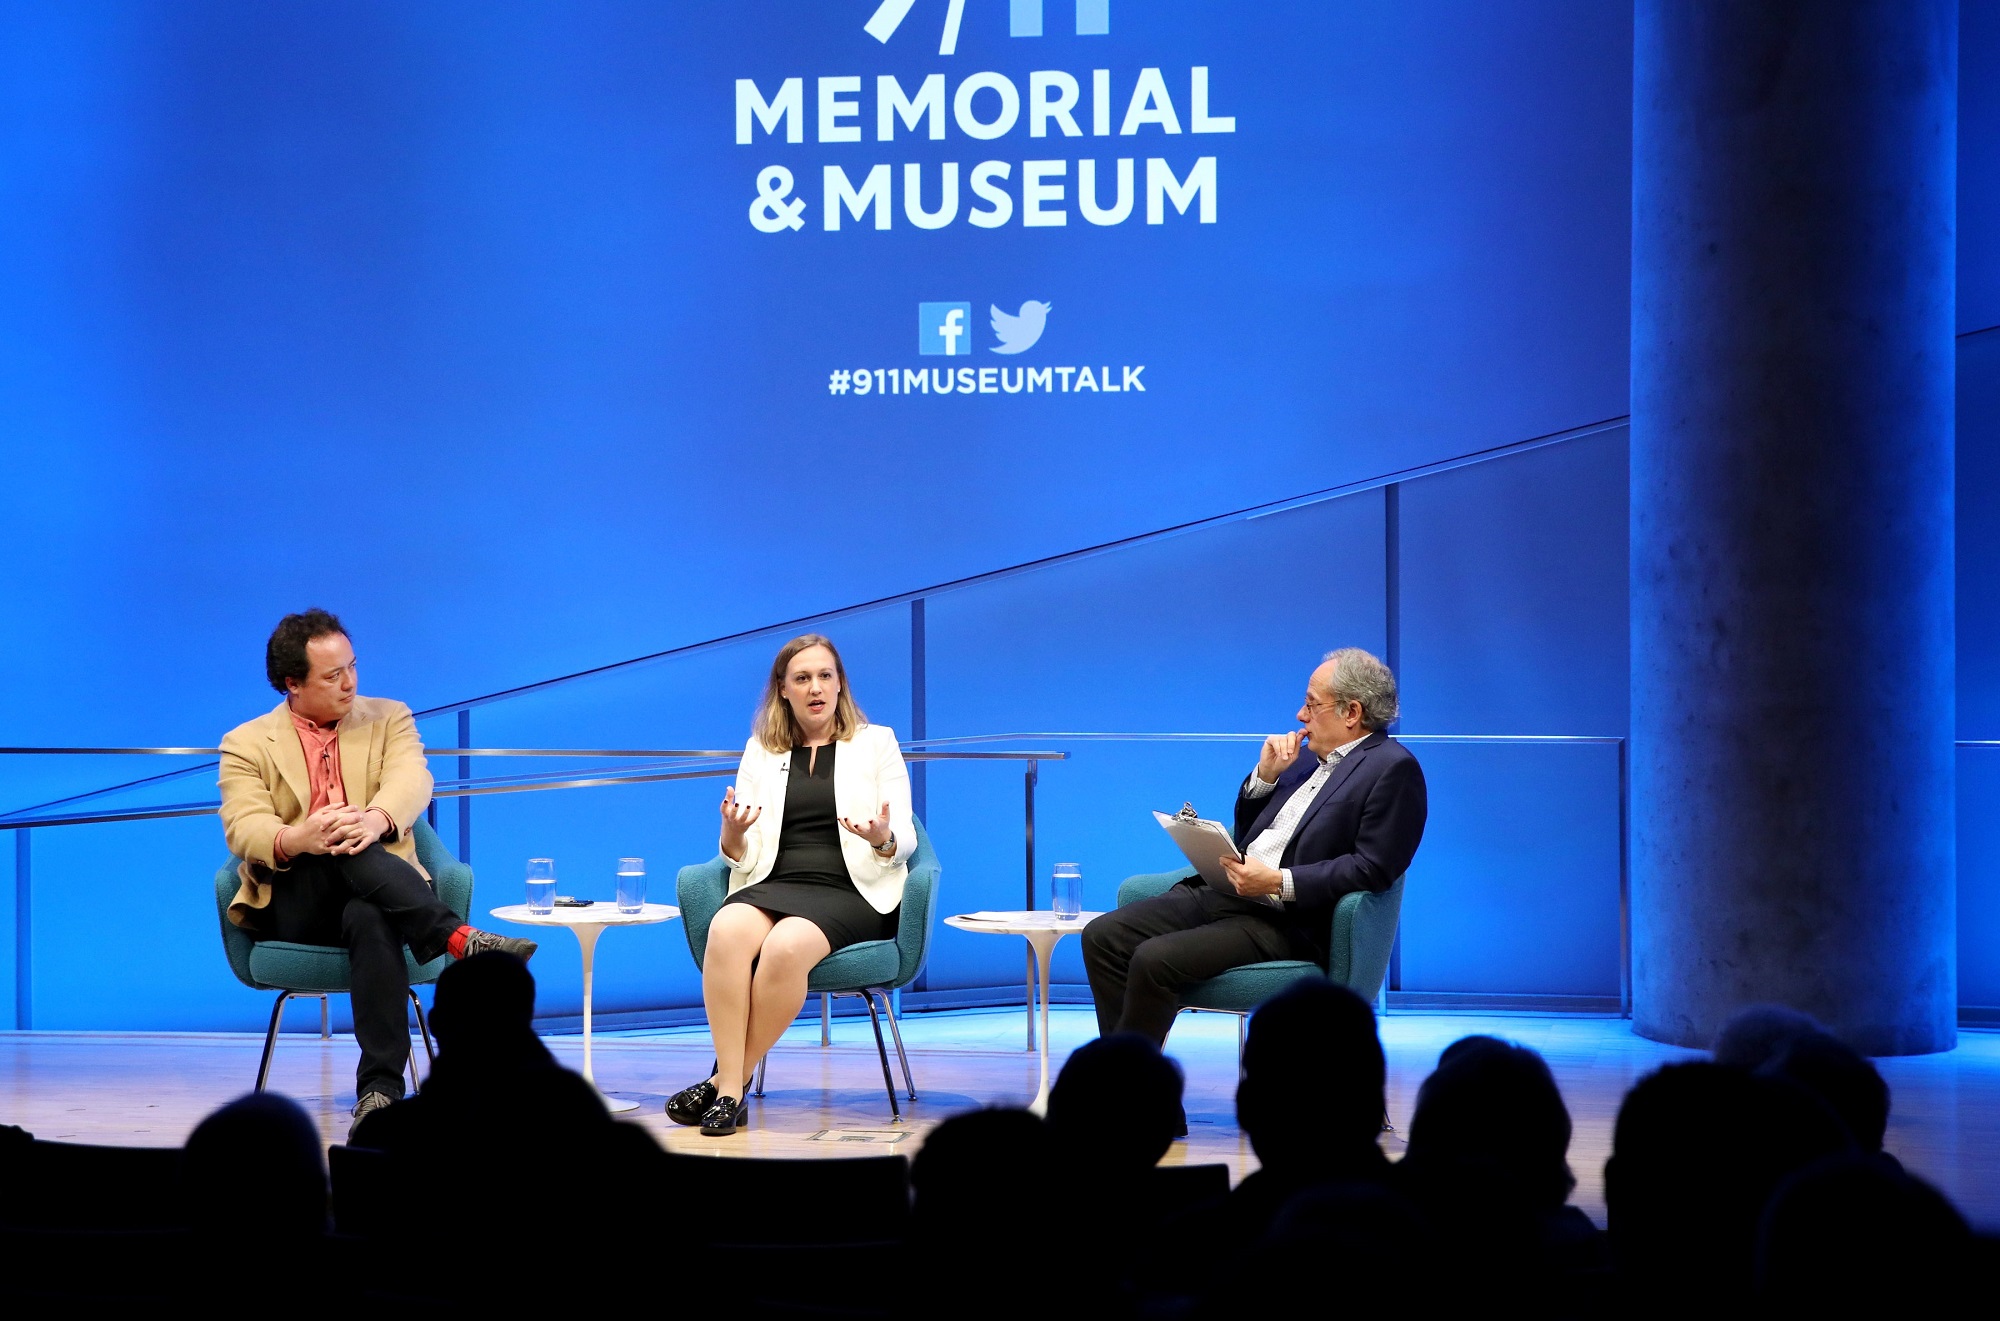 A wide-angle photo of the Museum Auditorium stage shows Devorah Margolin of George Washington University, Graeme Wood of The Atlantic and and Clifford Chanin, the executive vice president and deputy director for museum programs, taking part in a public program. Margolin is seated at the center of the stage gesturing with both hands as she speaks to the audience. Wood is to her right with his hands on his knee and Chanin is to her left holding a clipboard. Audience members are silhouetted in the foreground.